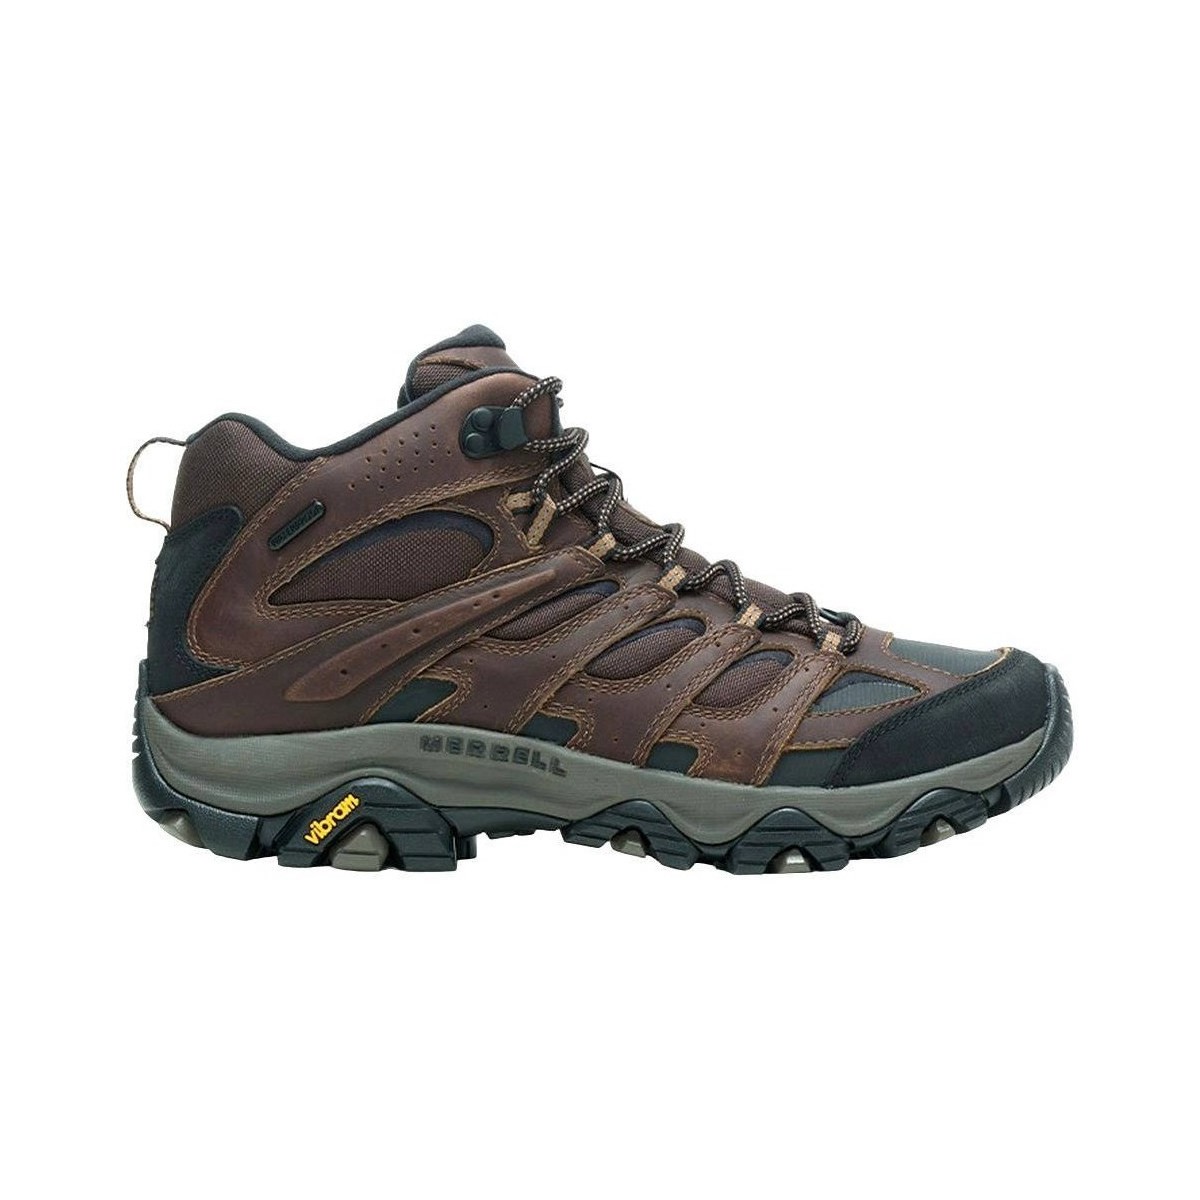 Chaussures Homme Baskets montantes Merrell Moab Thermo Mid WP Marron